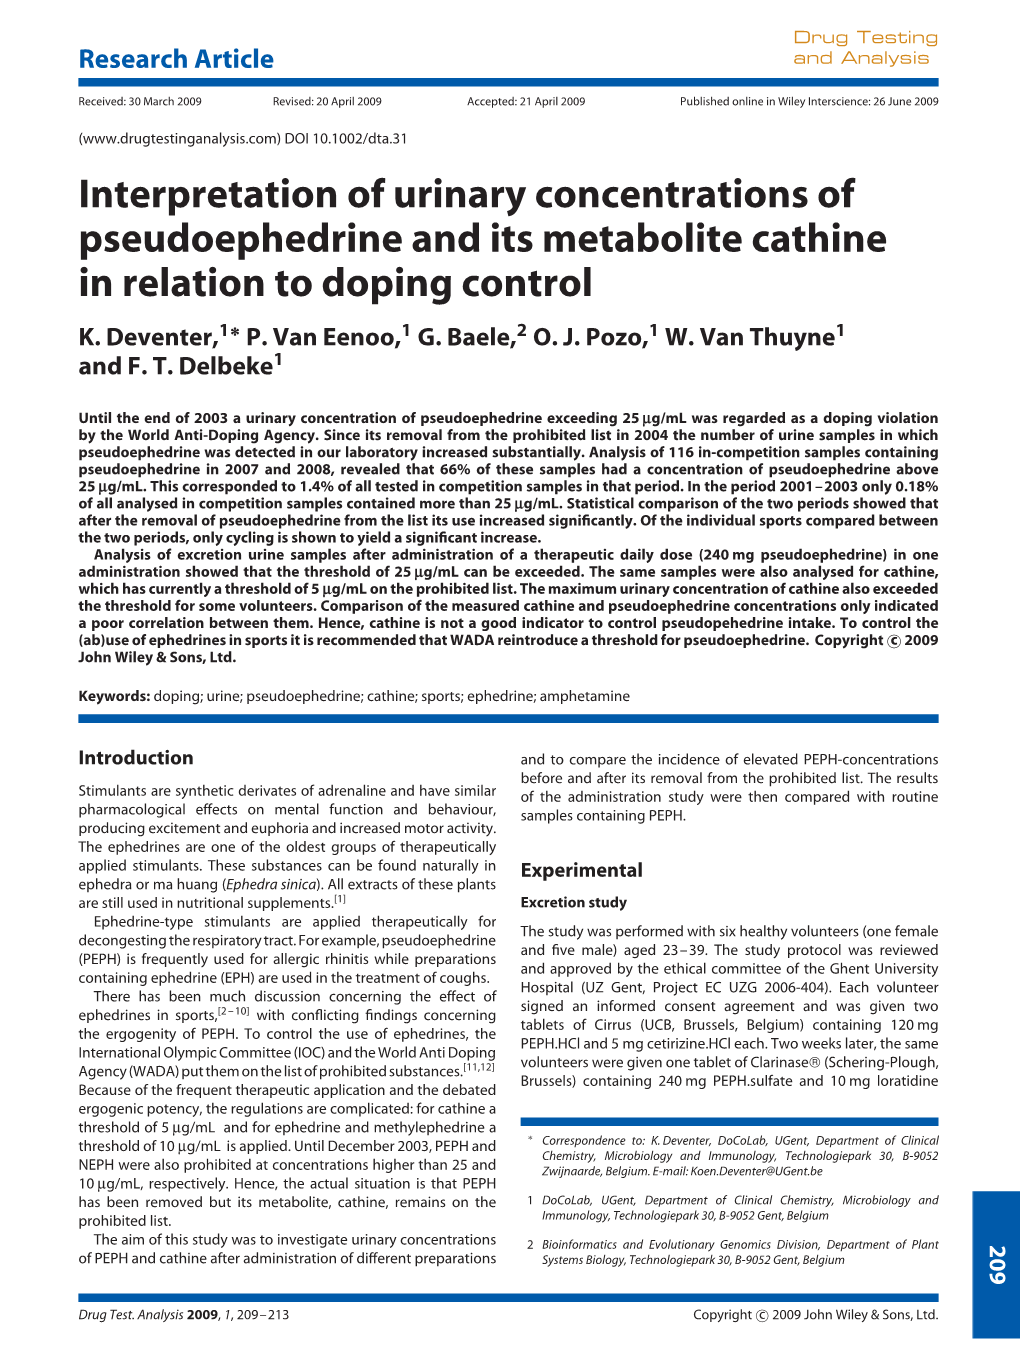 Interpretation of Urinary Concentrations of Pseudoephedrine and Its